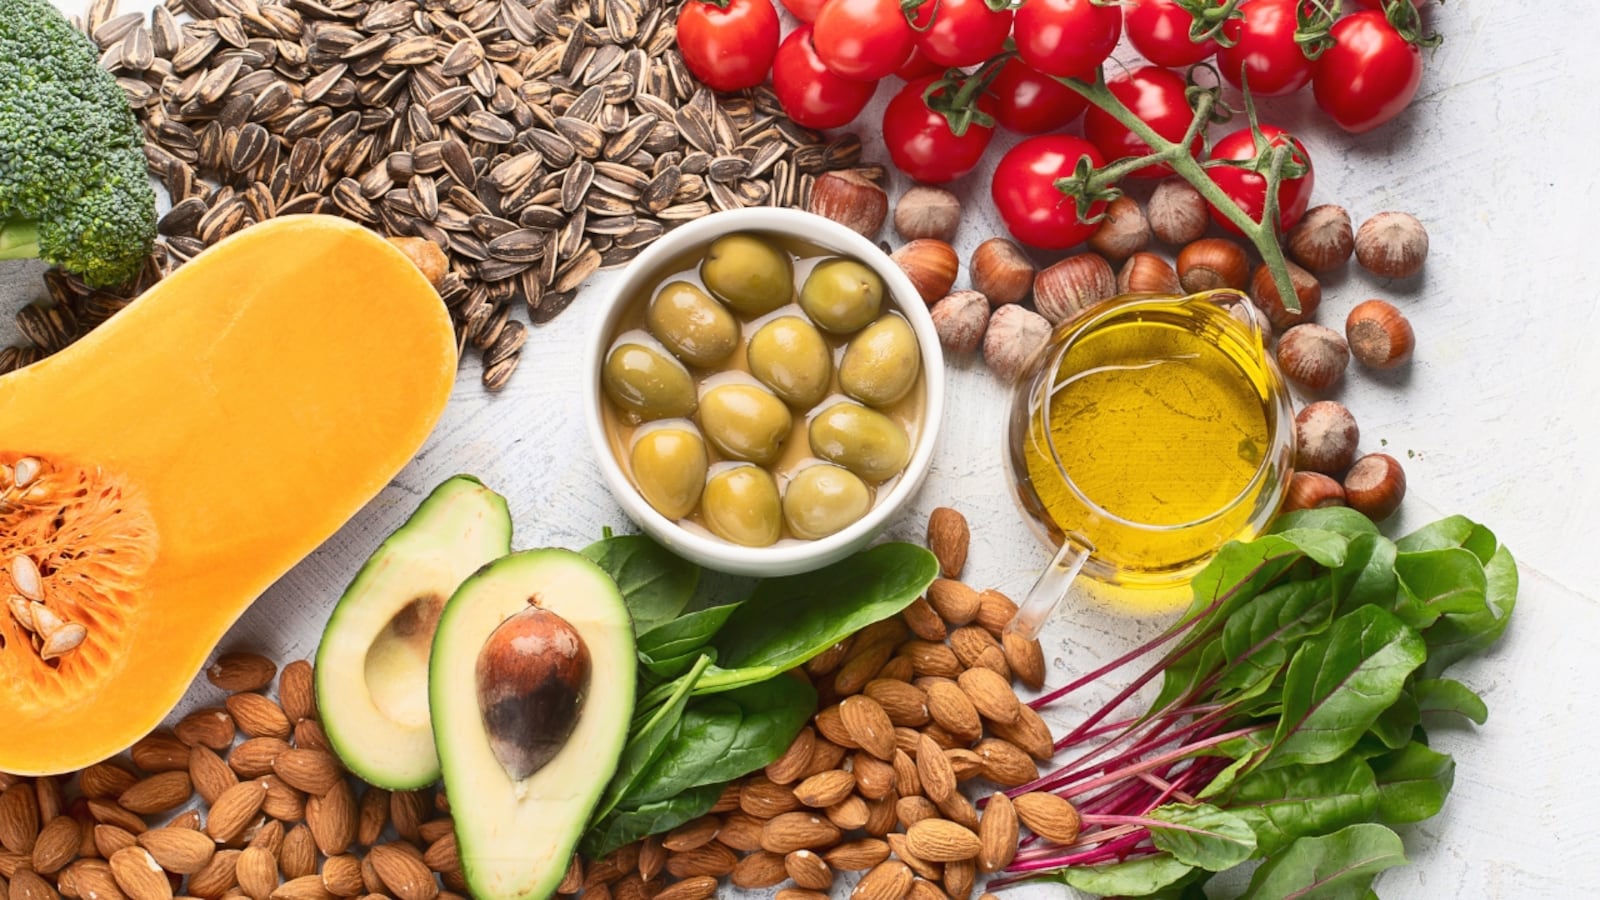 Secret health benefits of Vitamin E for hair care, dry skin, healing wounds  and more